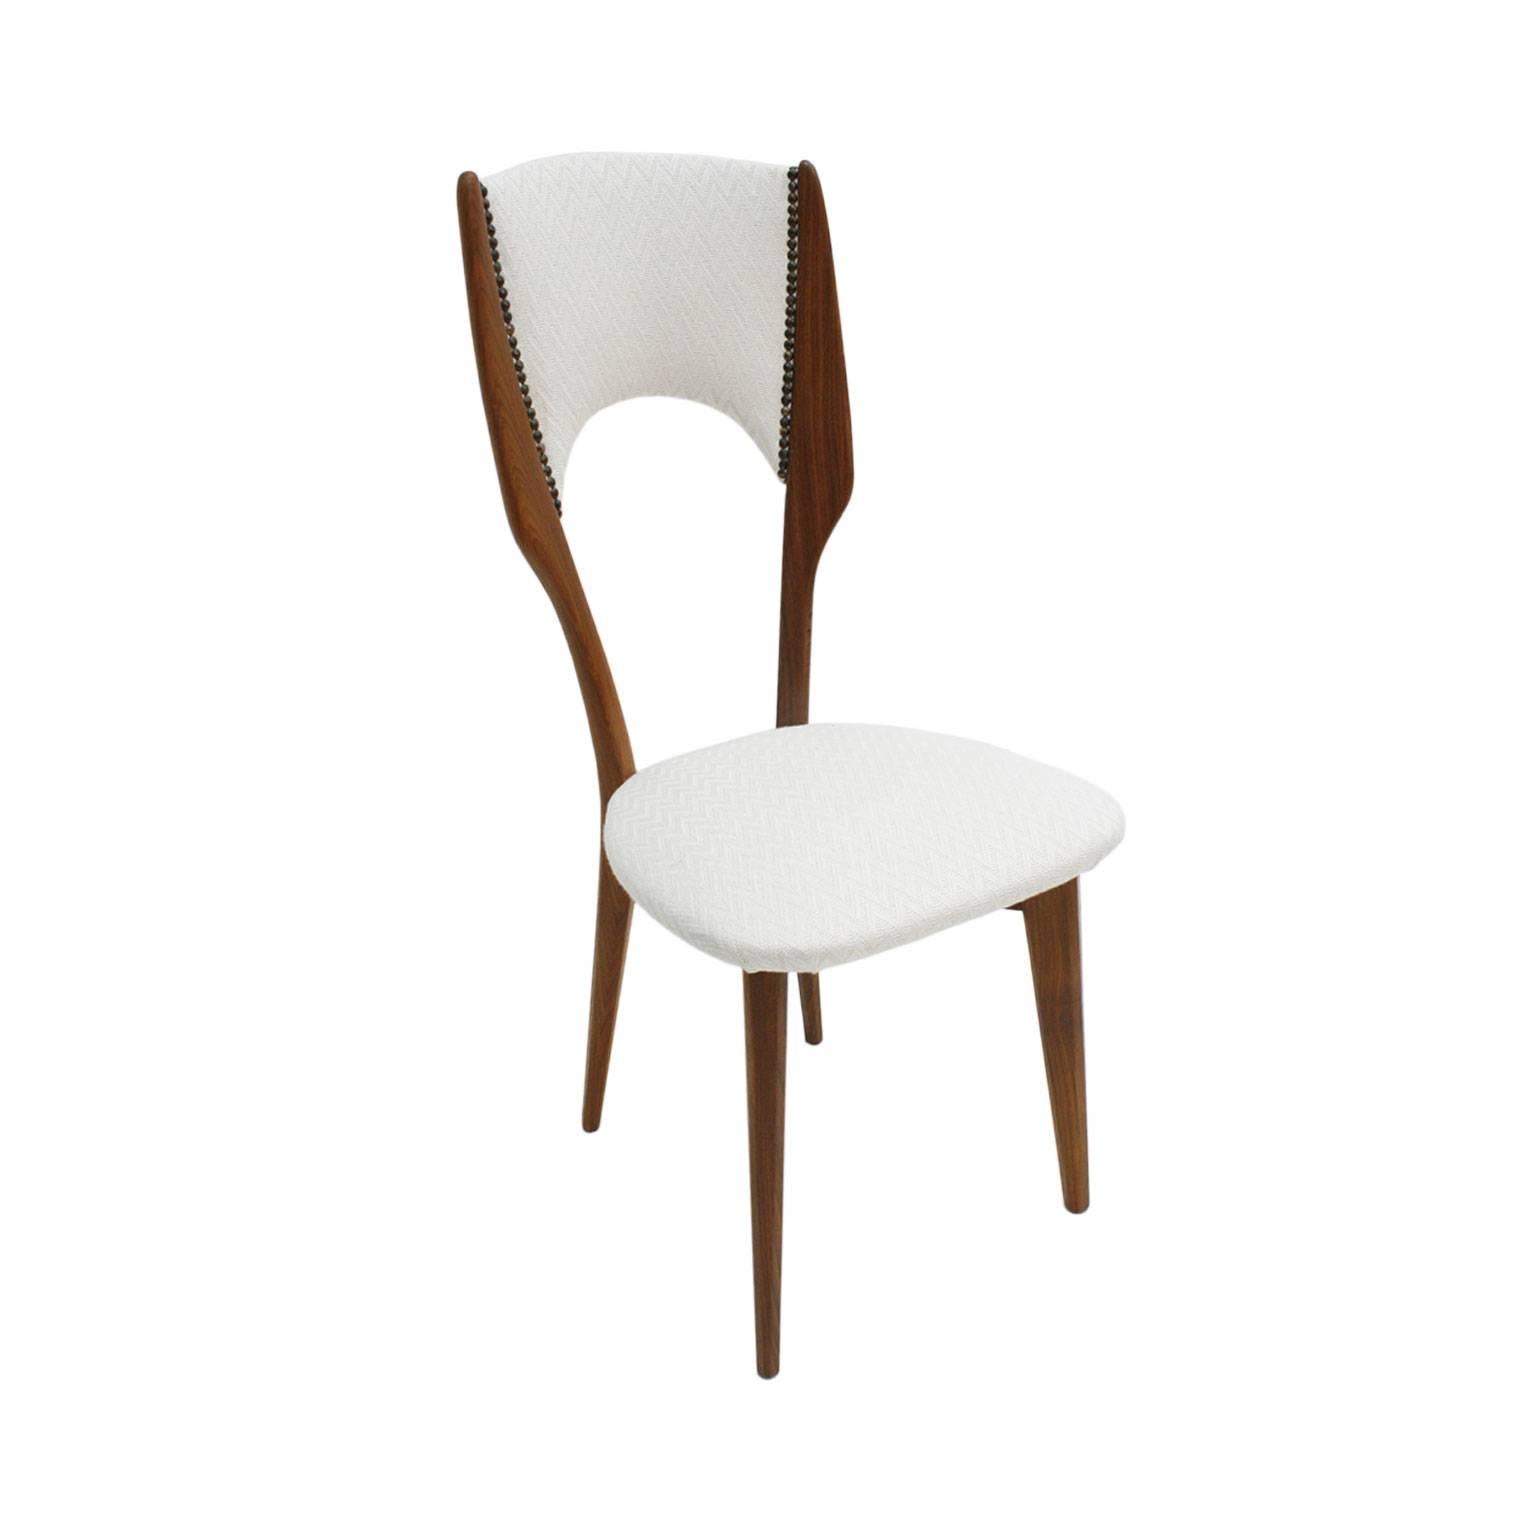 Mid-20th Century Paolo Buffa Mid-Century Modern Italian Rosewood and White Cotton Fabric Chairs